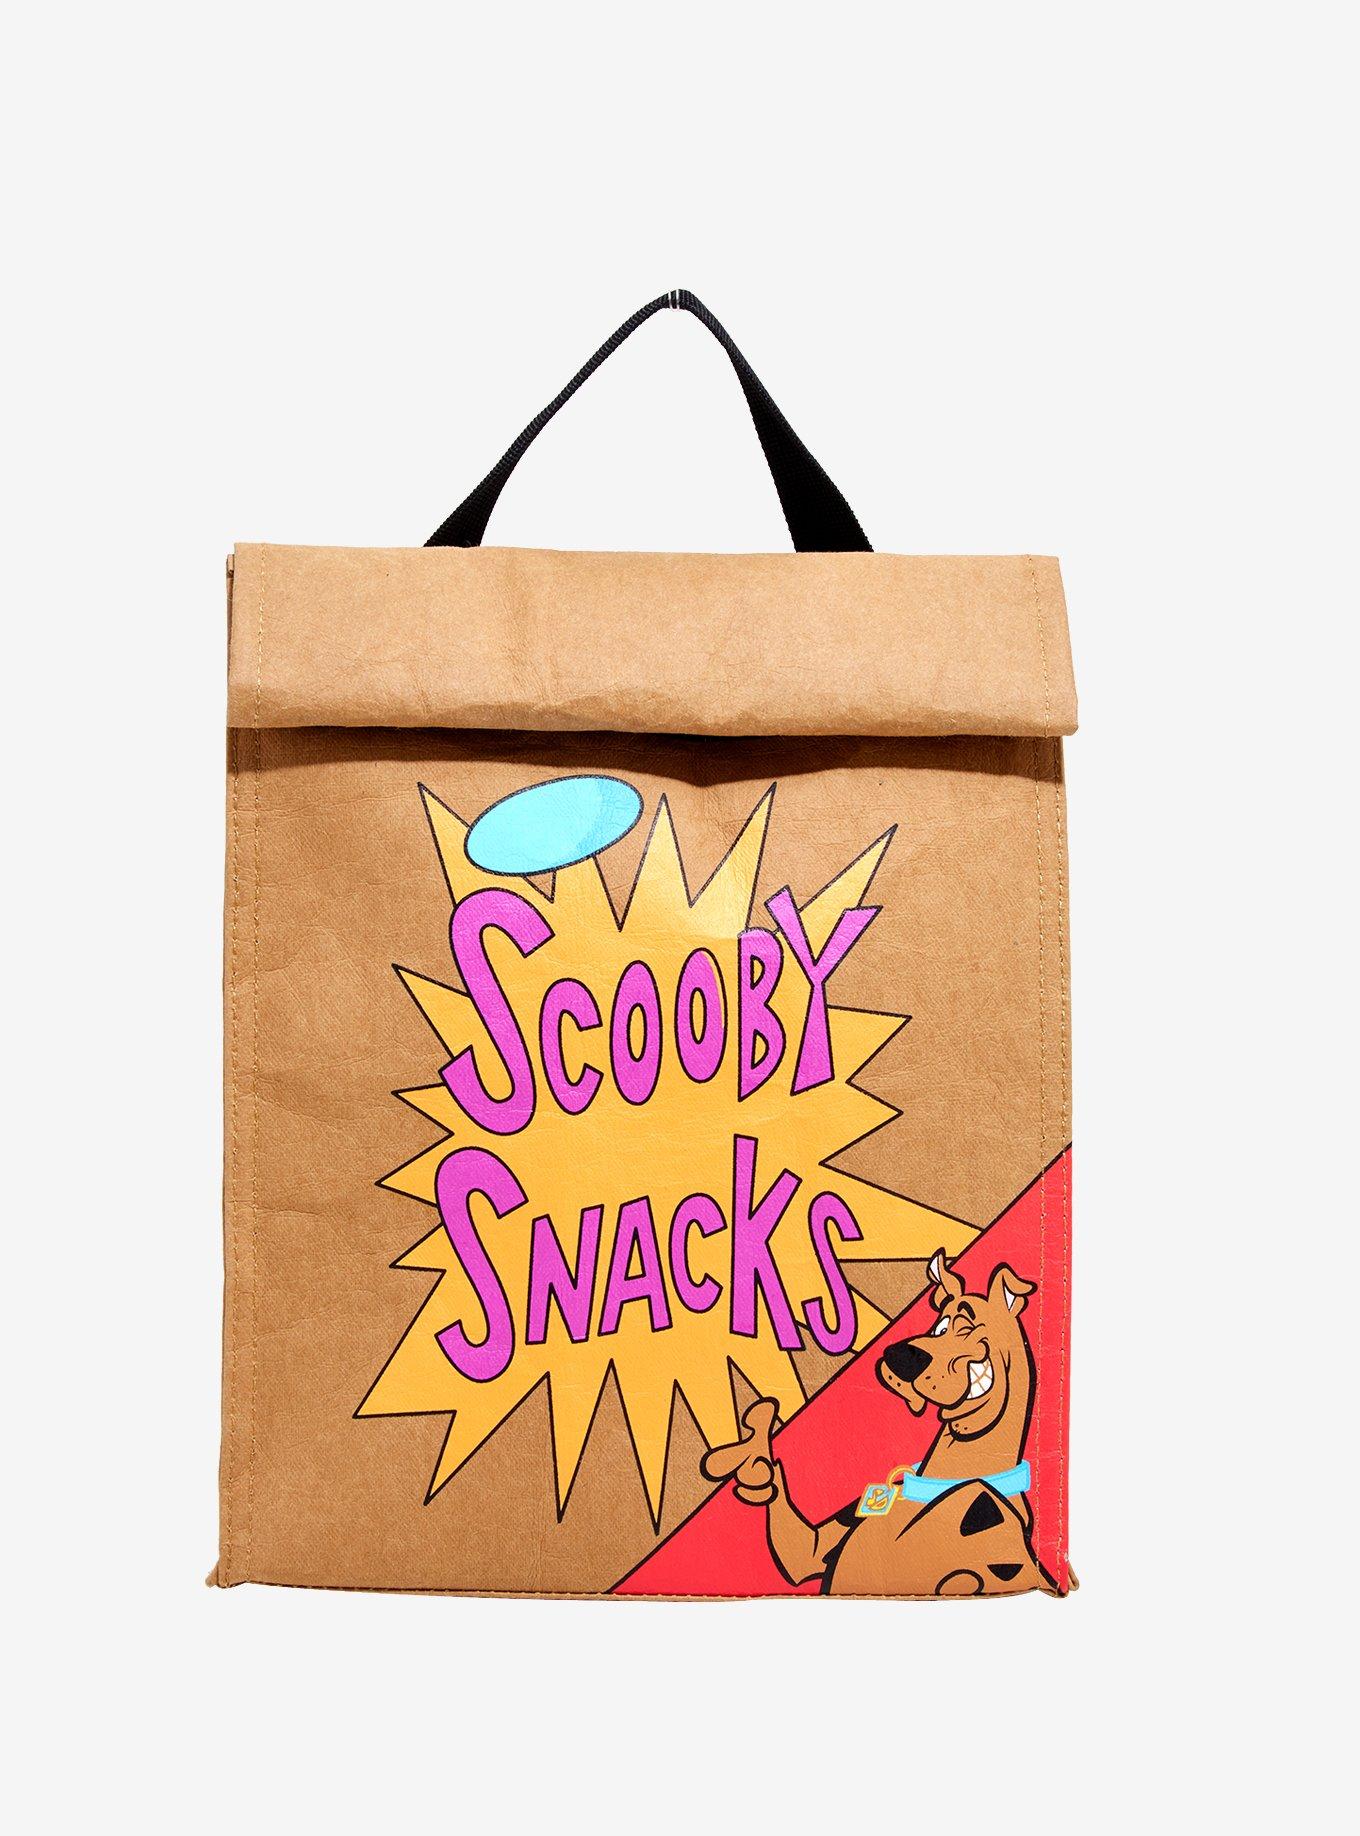 Scooby-Doo Scooby Snacks Insulated Lunch Sack